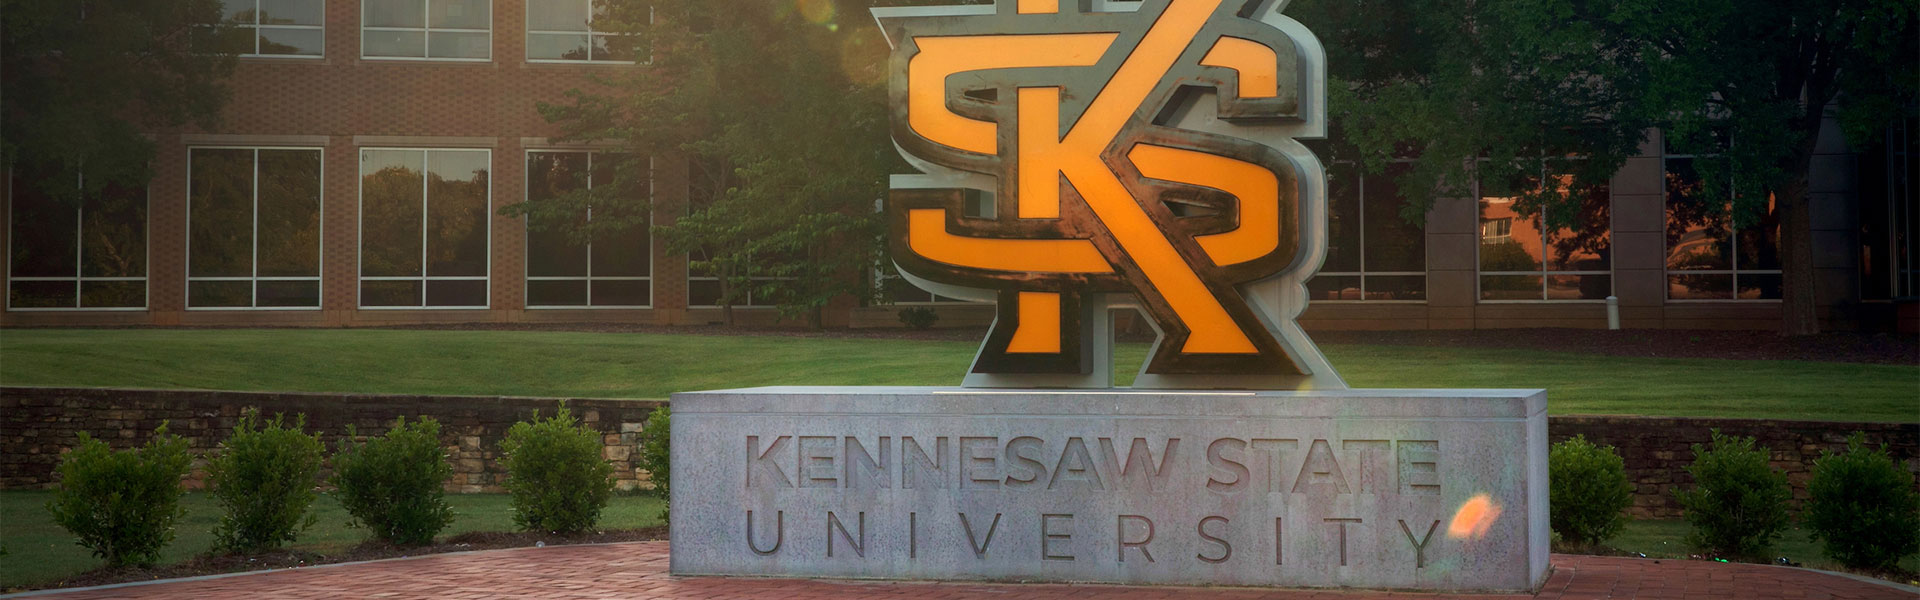 Kennesaw State University sign